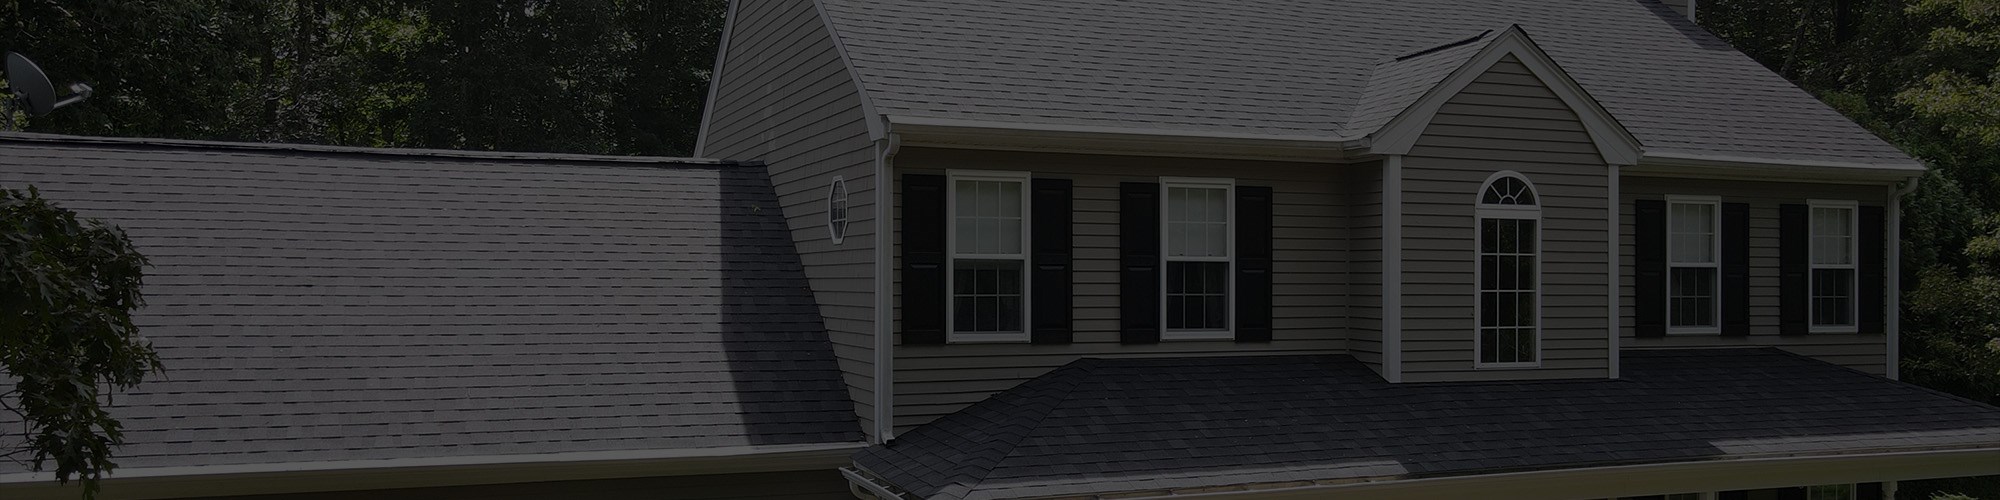 Residential roof in Massachusetts financed with roof payment plans